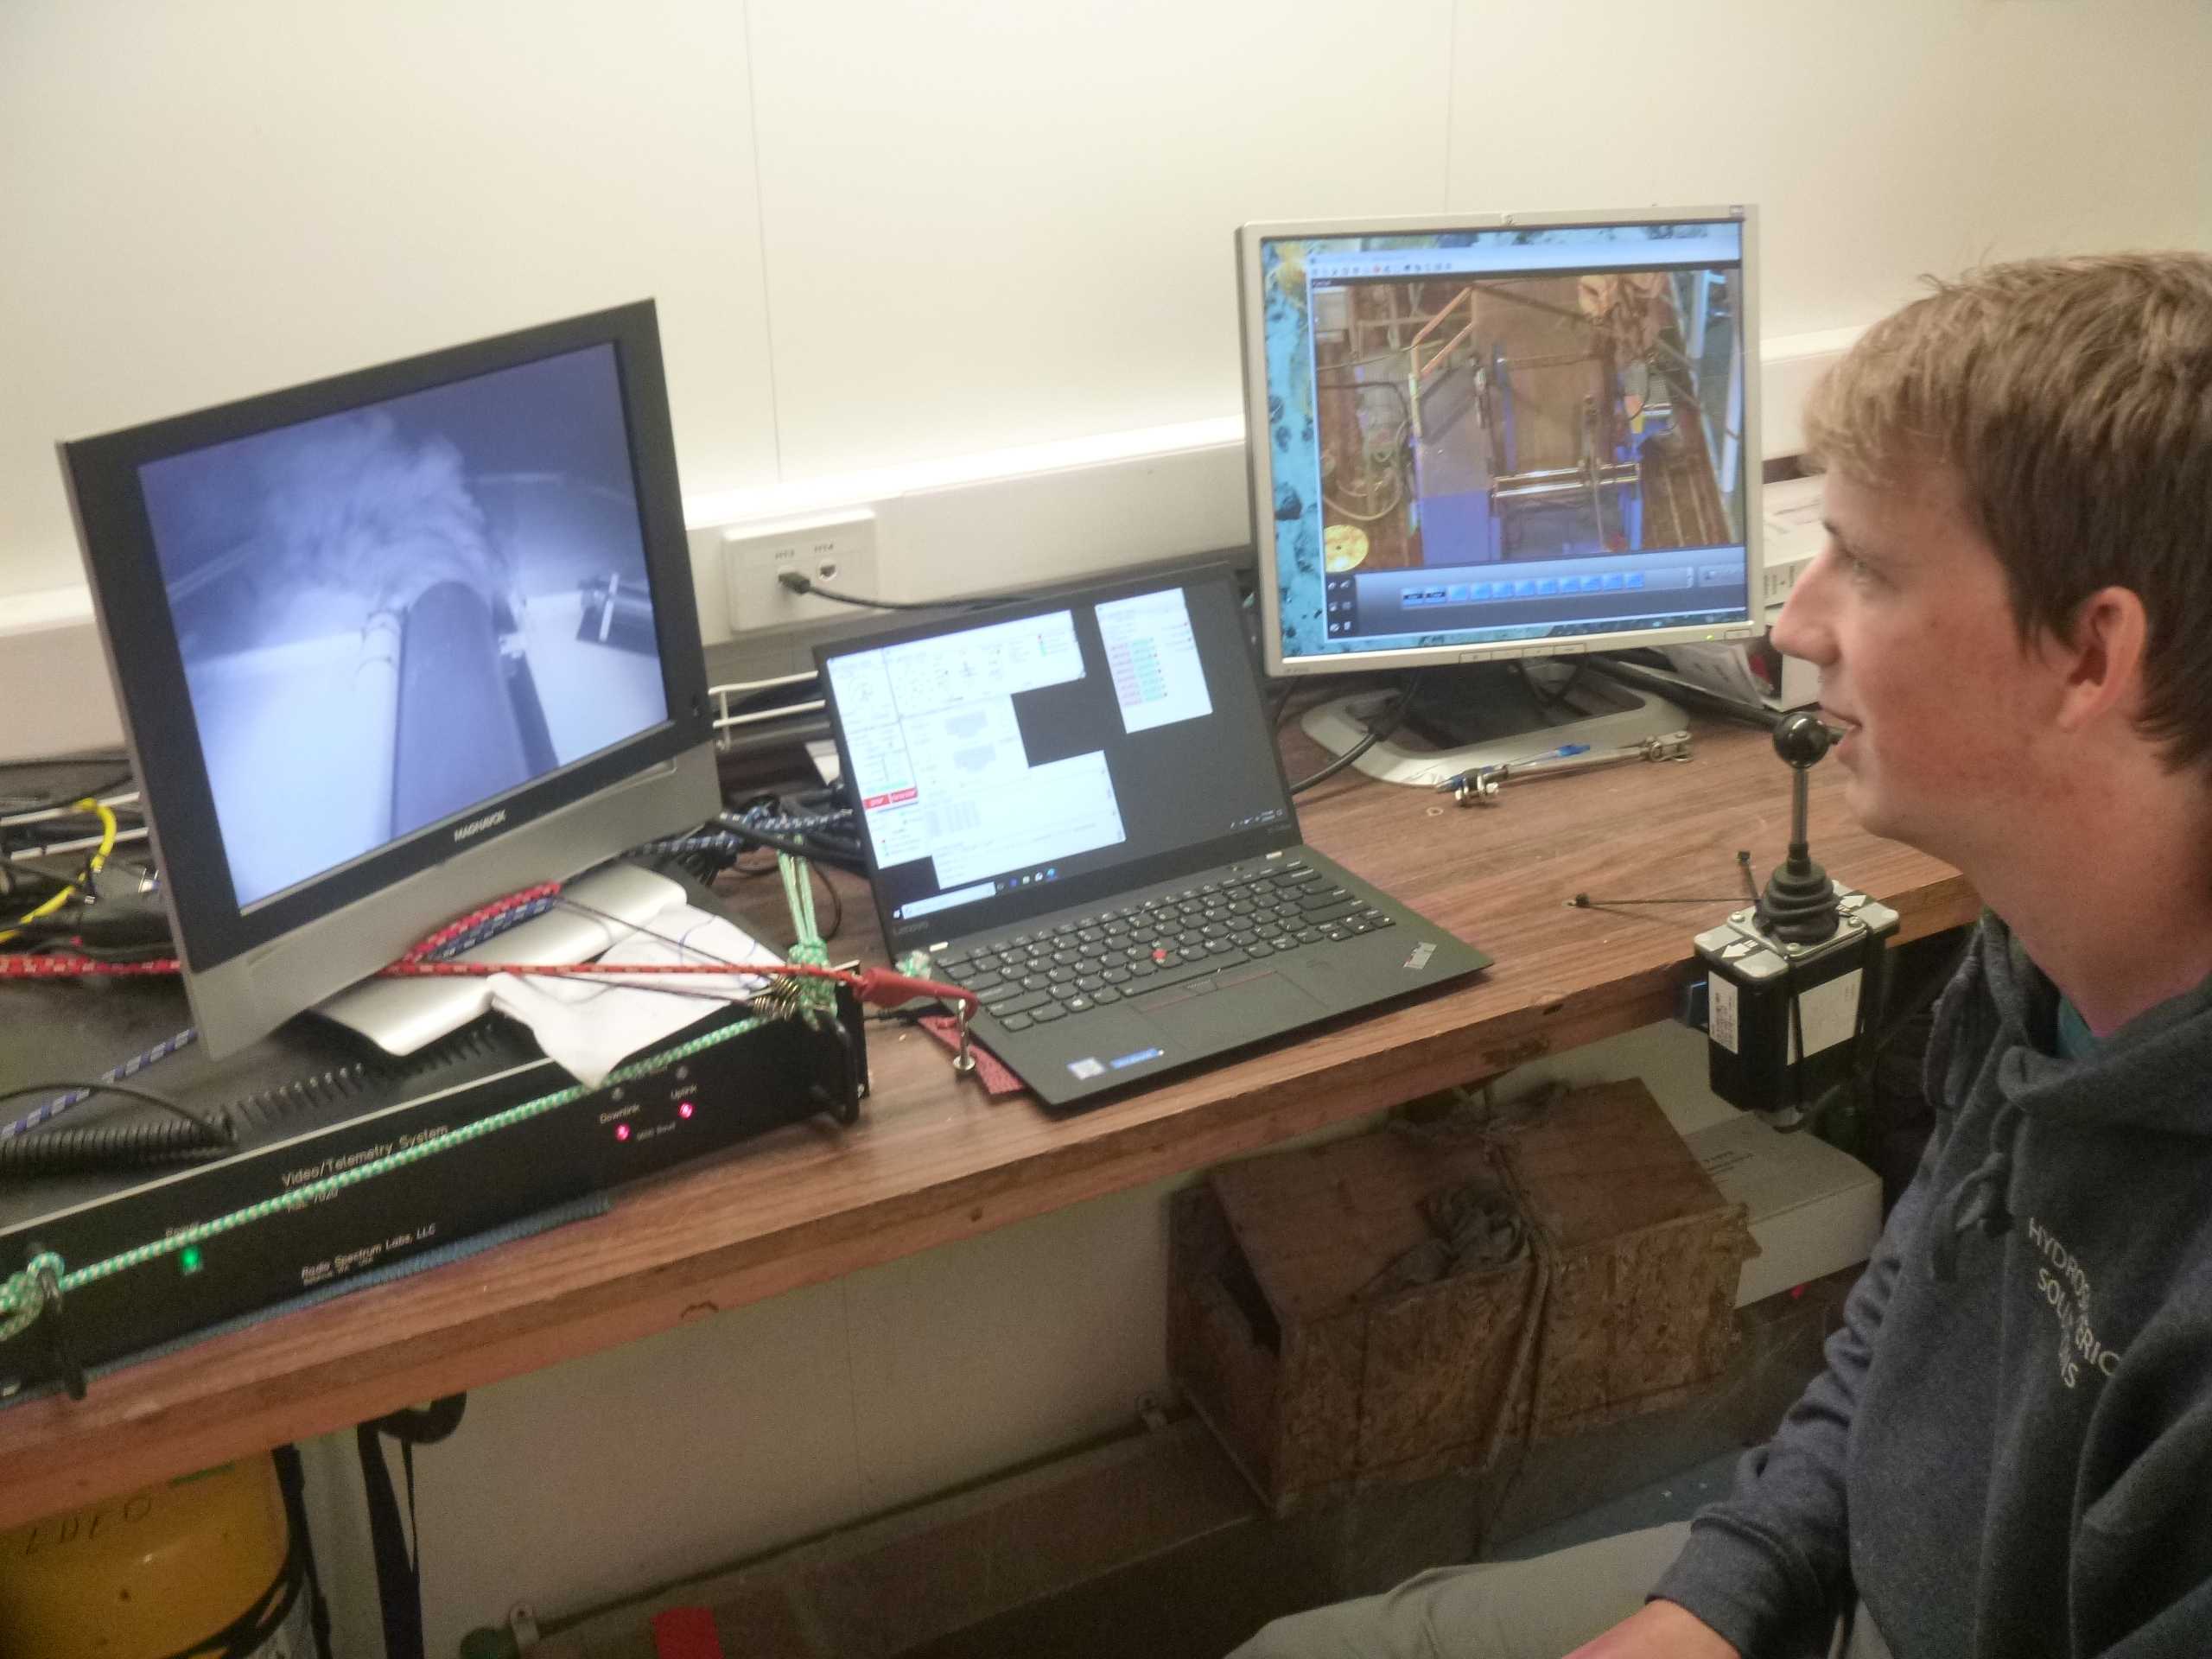 Figure 3. The Benthic Disturber being monitored during operation (the chimney plume is on the left screen)